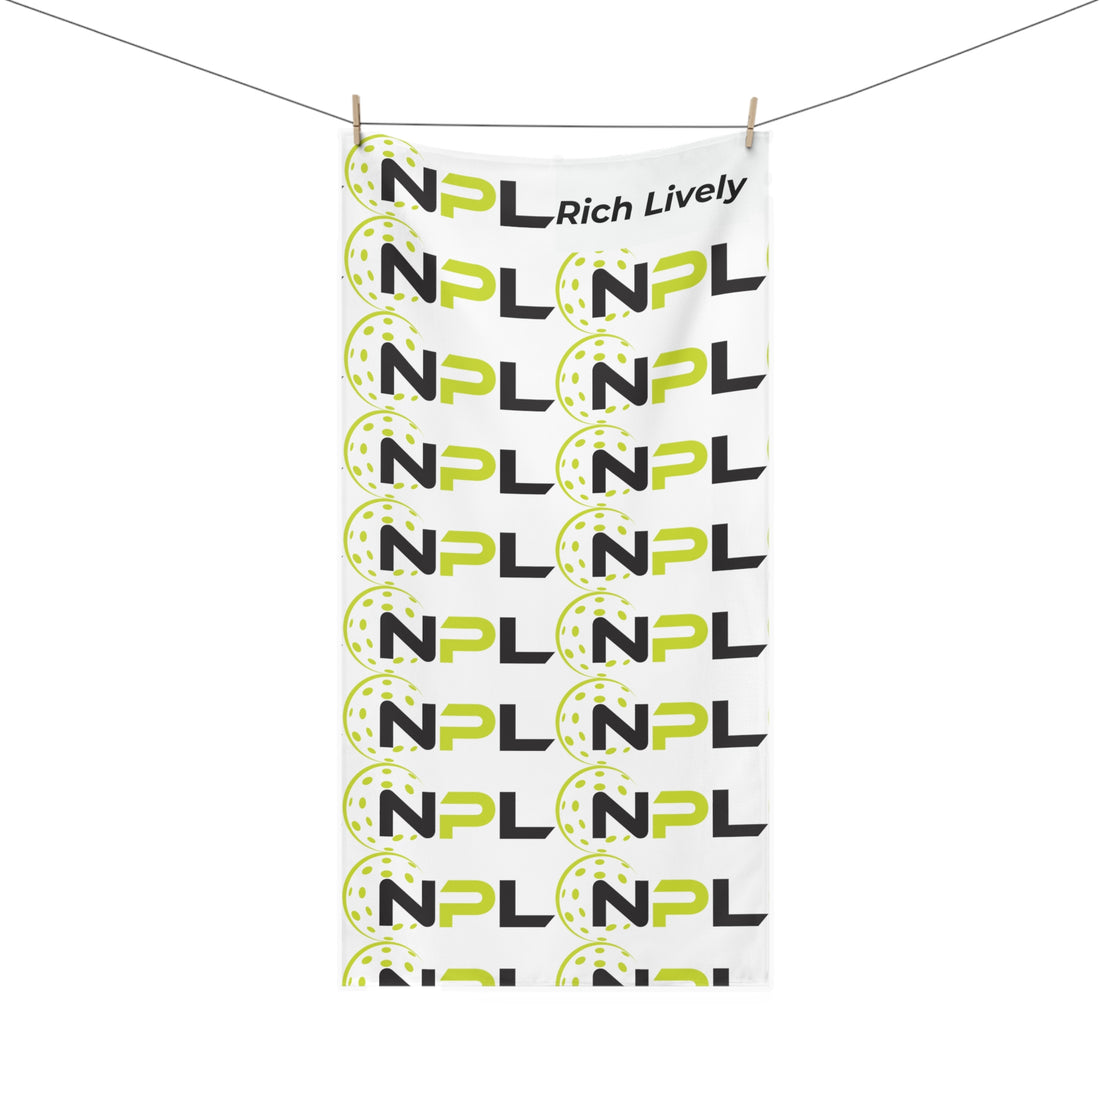 The Rich Lively - NPL MINK-COTTON TOWEL: LUXURY AND PERFORMANCE